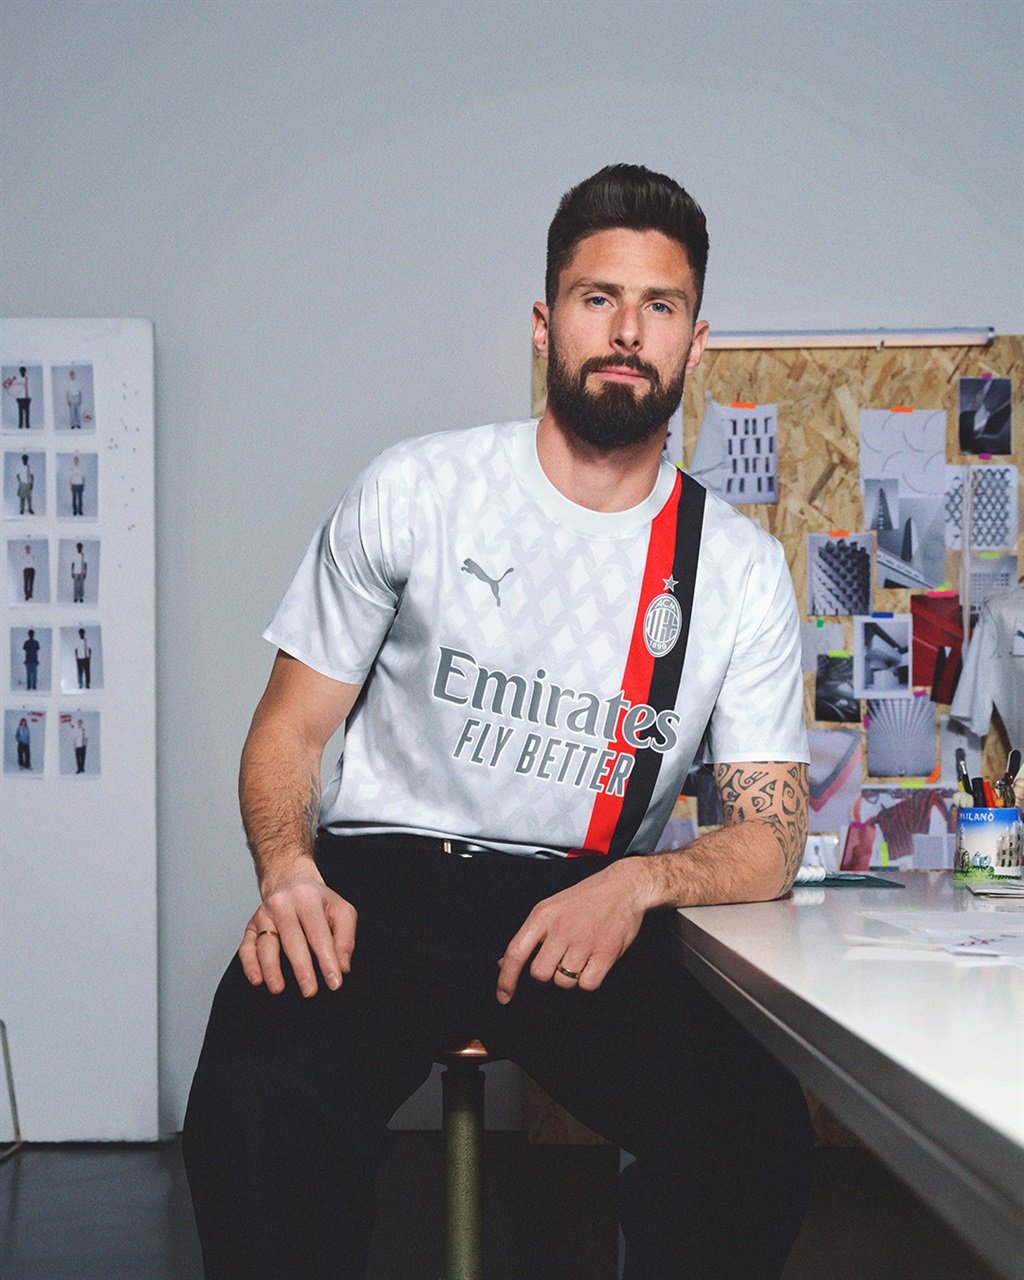 PUMA proudly introduces the new AC Milan Away kit for the 2023/24 season, designed to celebrate Milan’s place at the intersection of football, fashion and design.